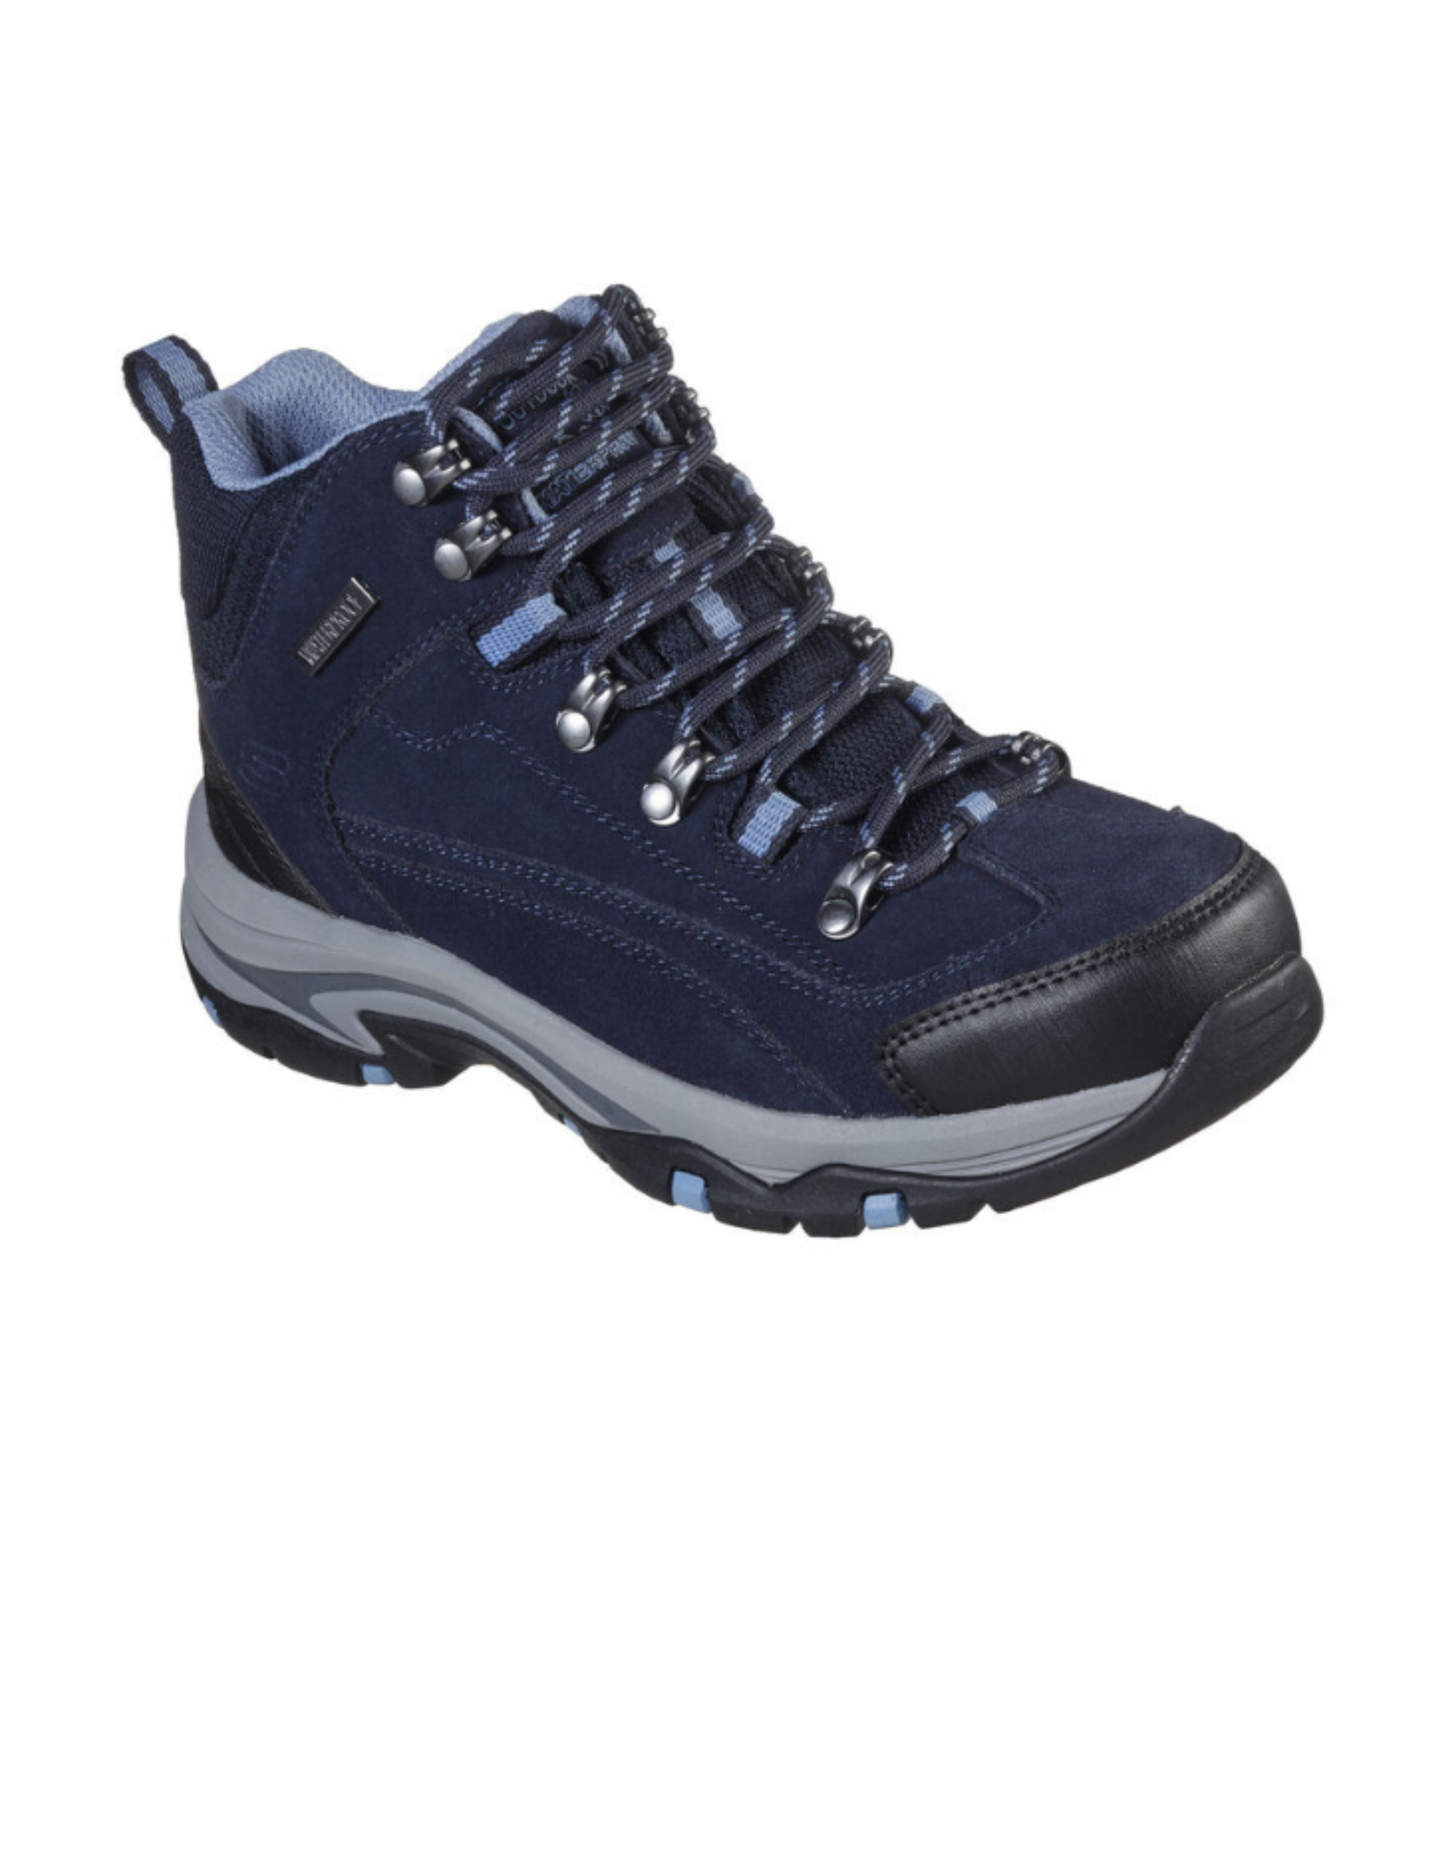 Skechers 167004 NVGY Relaxed Fit: Trego - Alpine Trail - Navy Grey